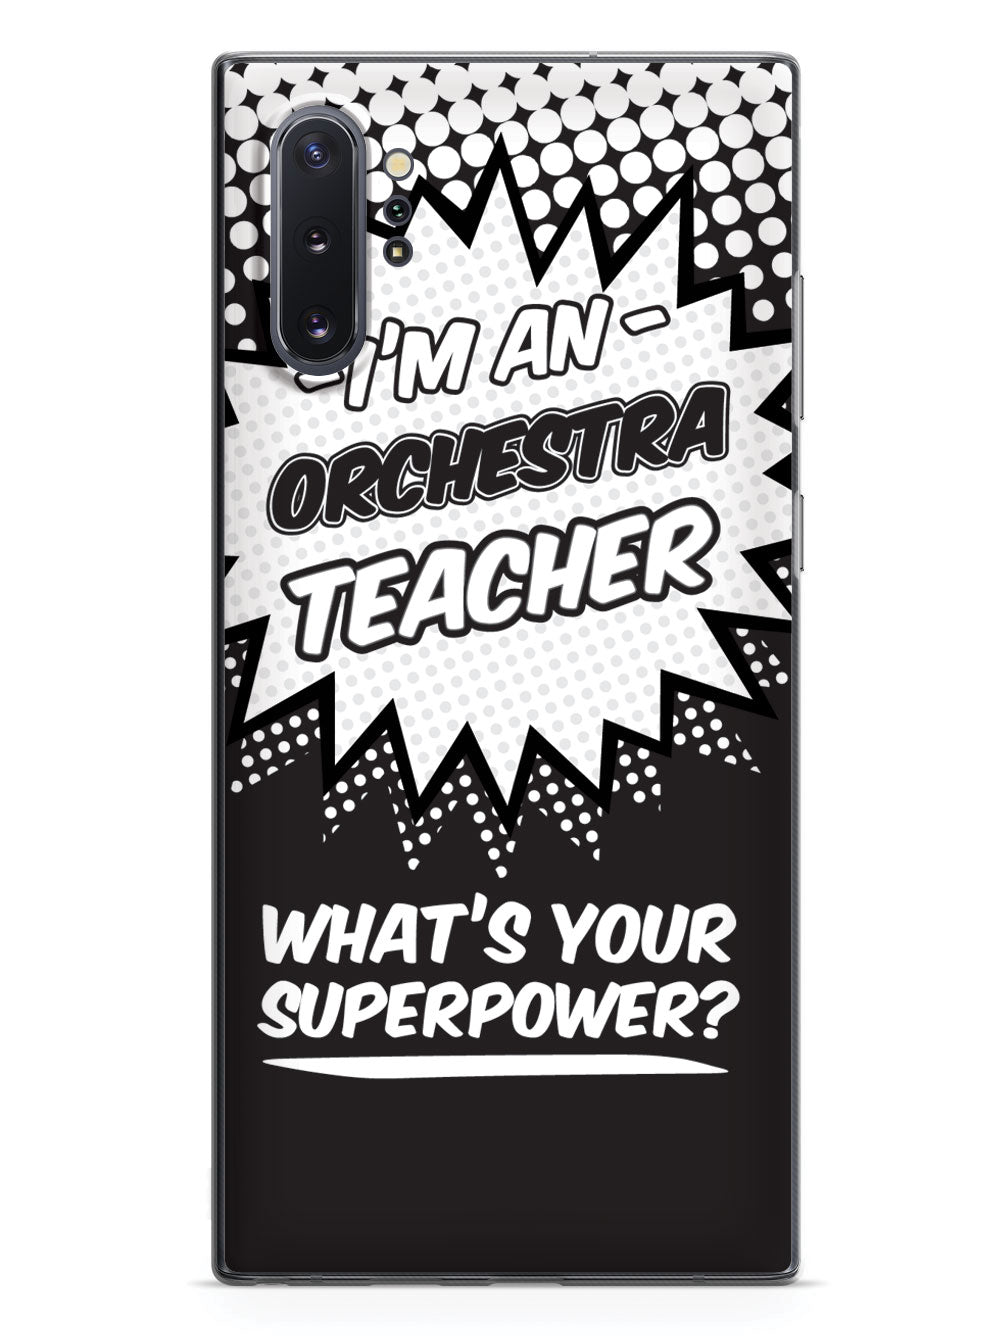 Orchestra Teacher - What's Your Superpower? Case